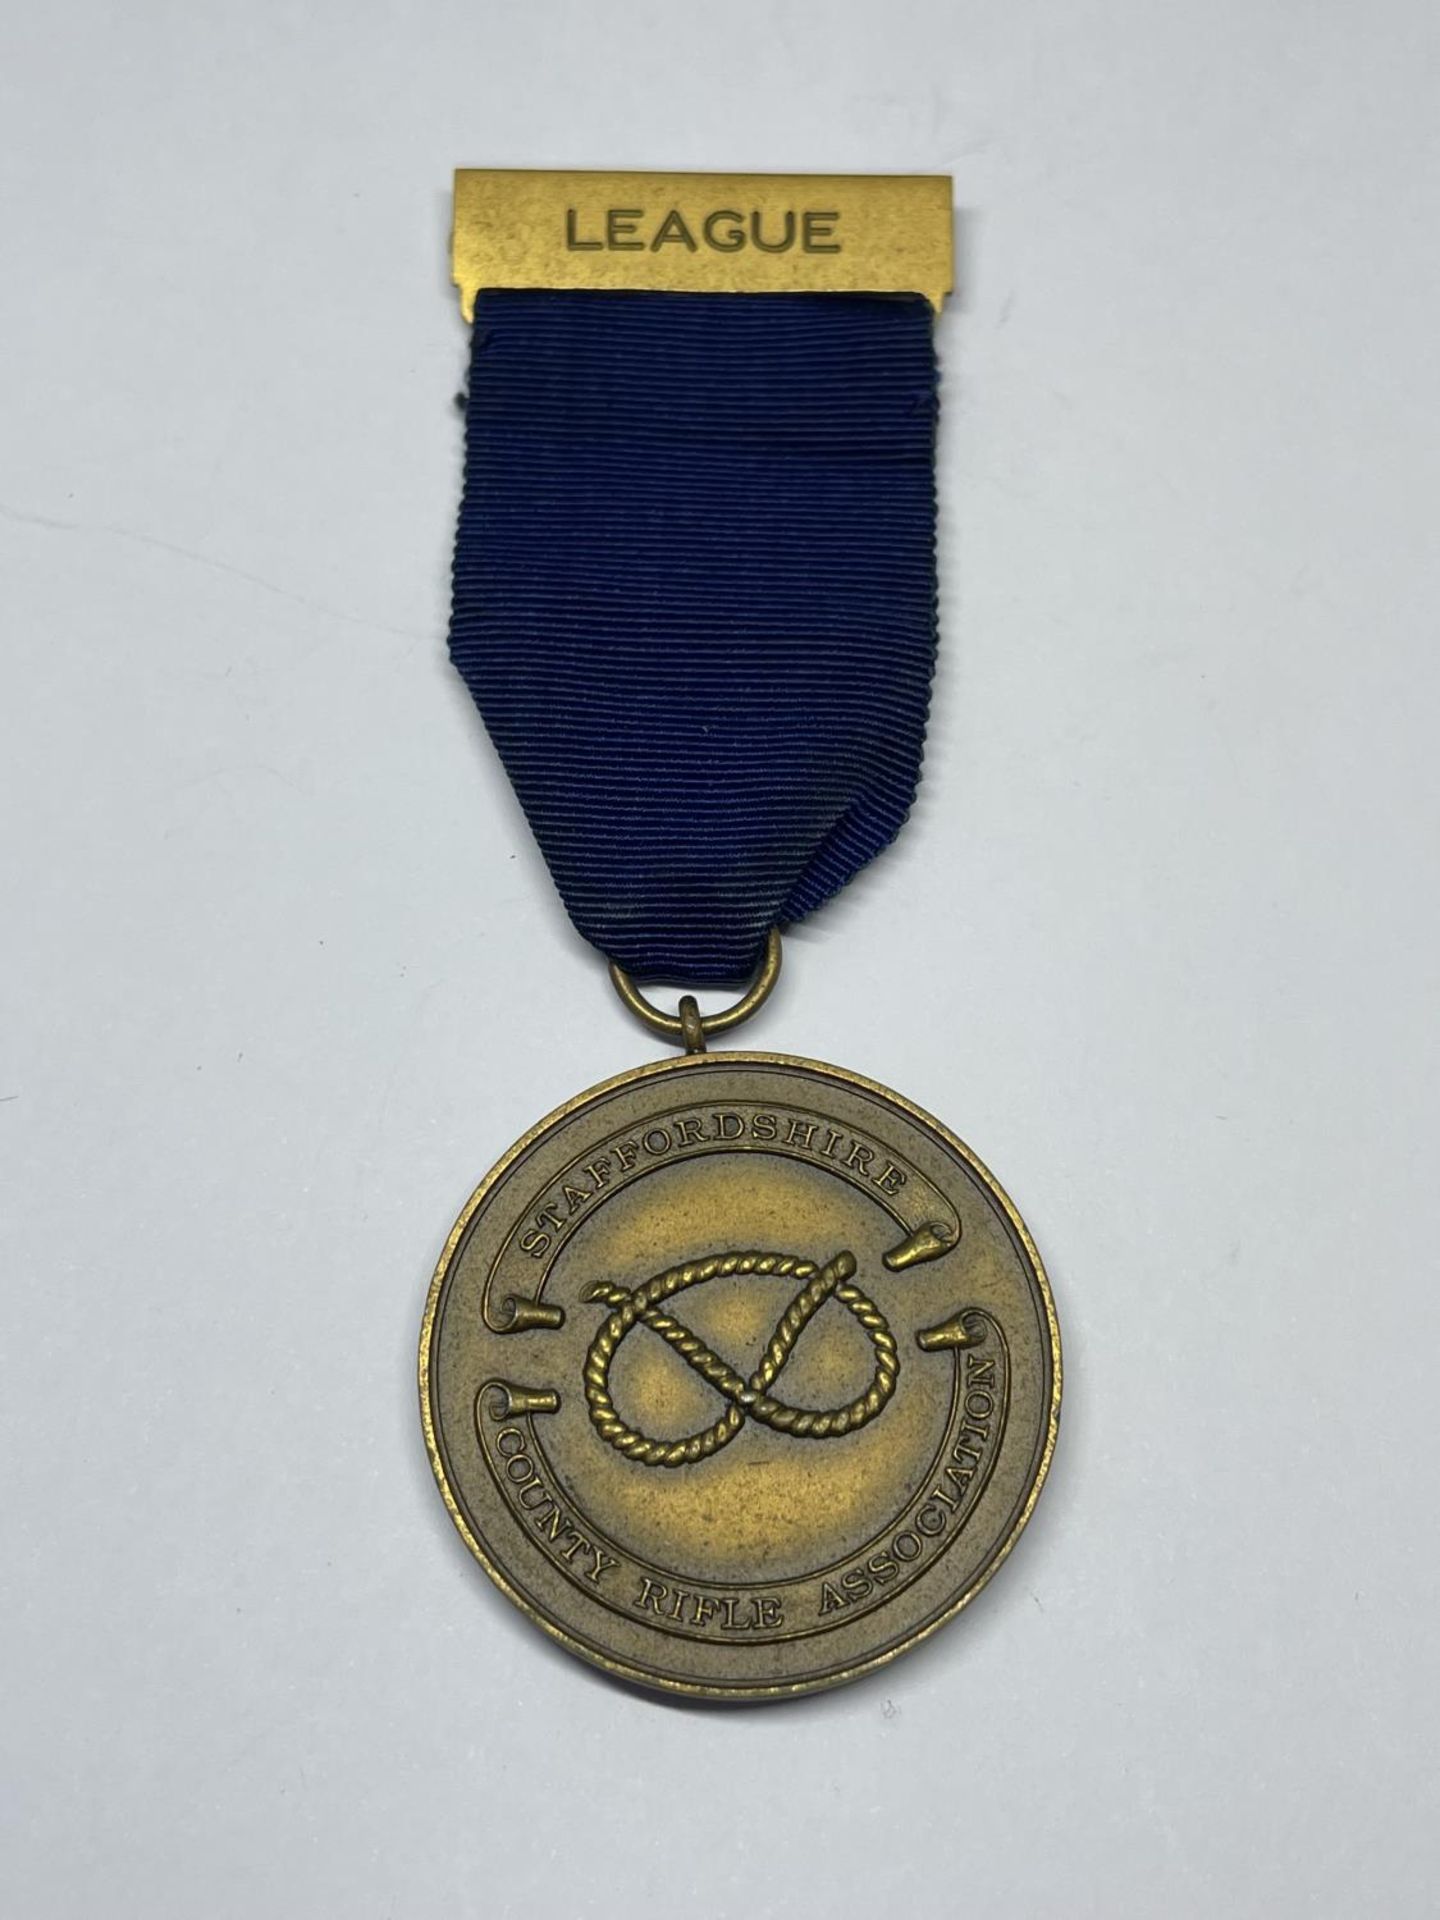 A STAFFORDSHIRE COUNTY RIFLE MEDAL